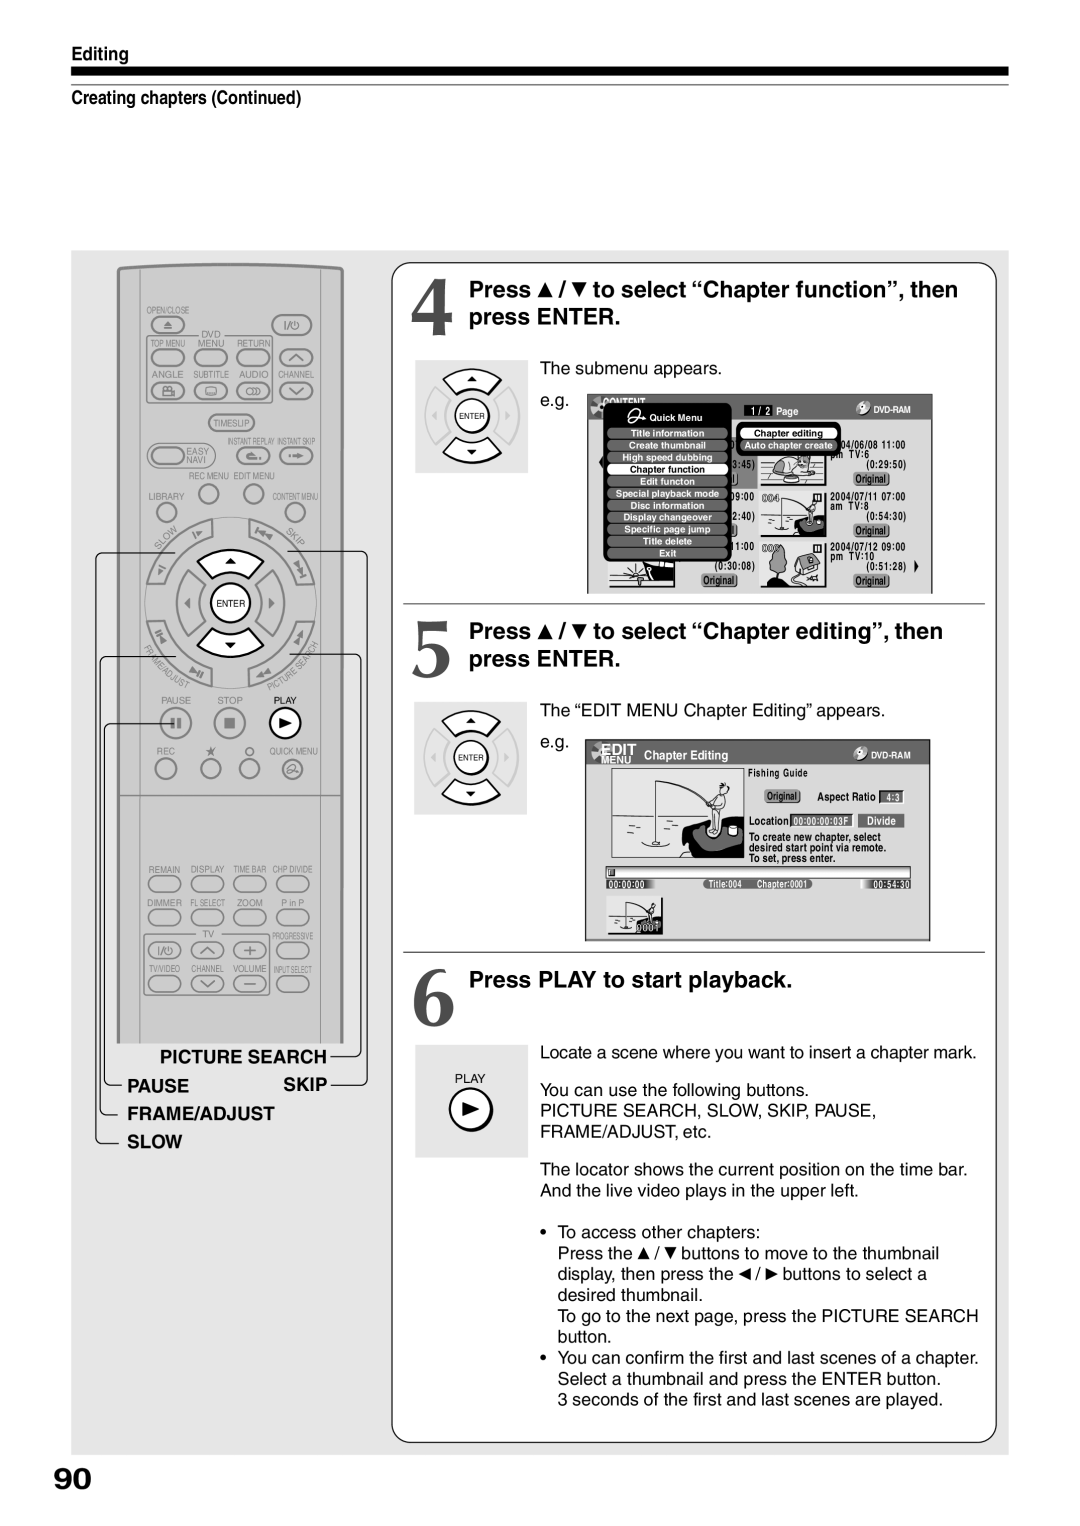 Toshiba D-R2SU, D-R2SC, D-KR2SU Press / to select “Chapter function”, then press ENTER, Press PLAY to start playback 